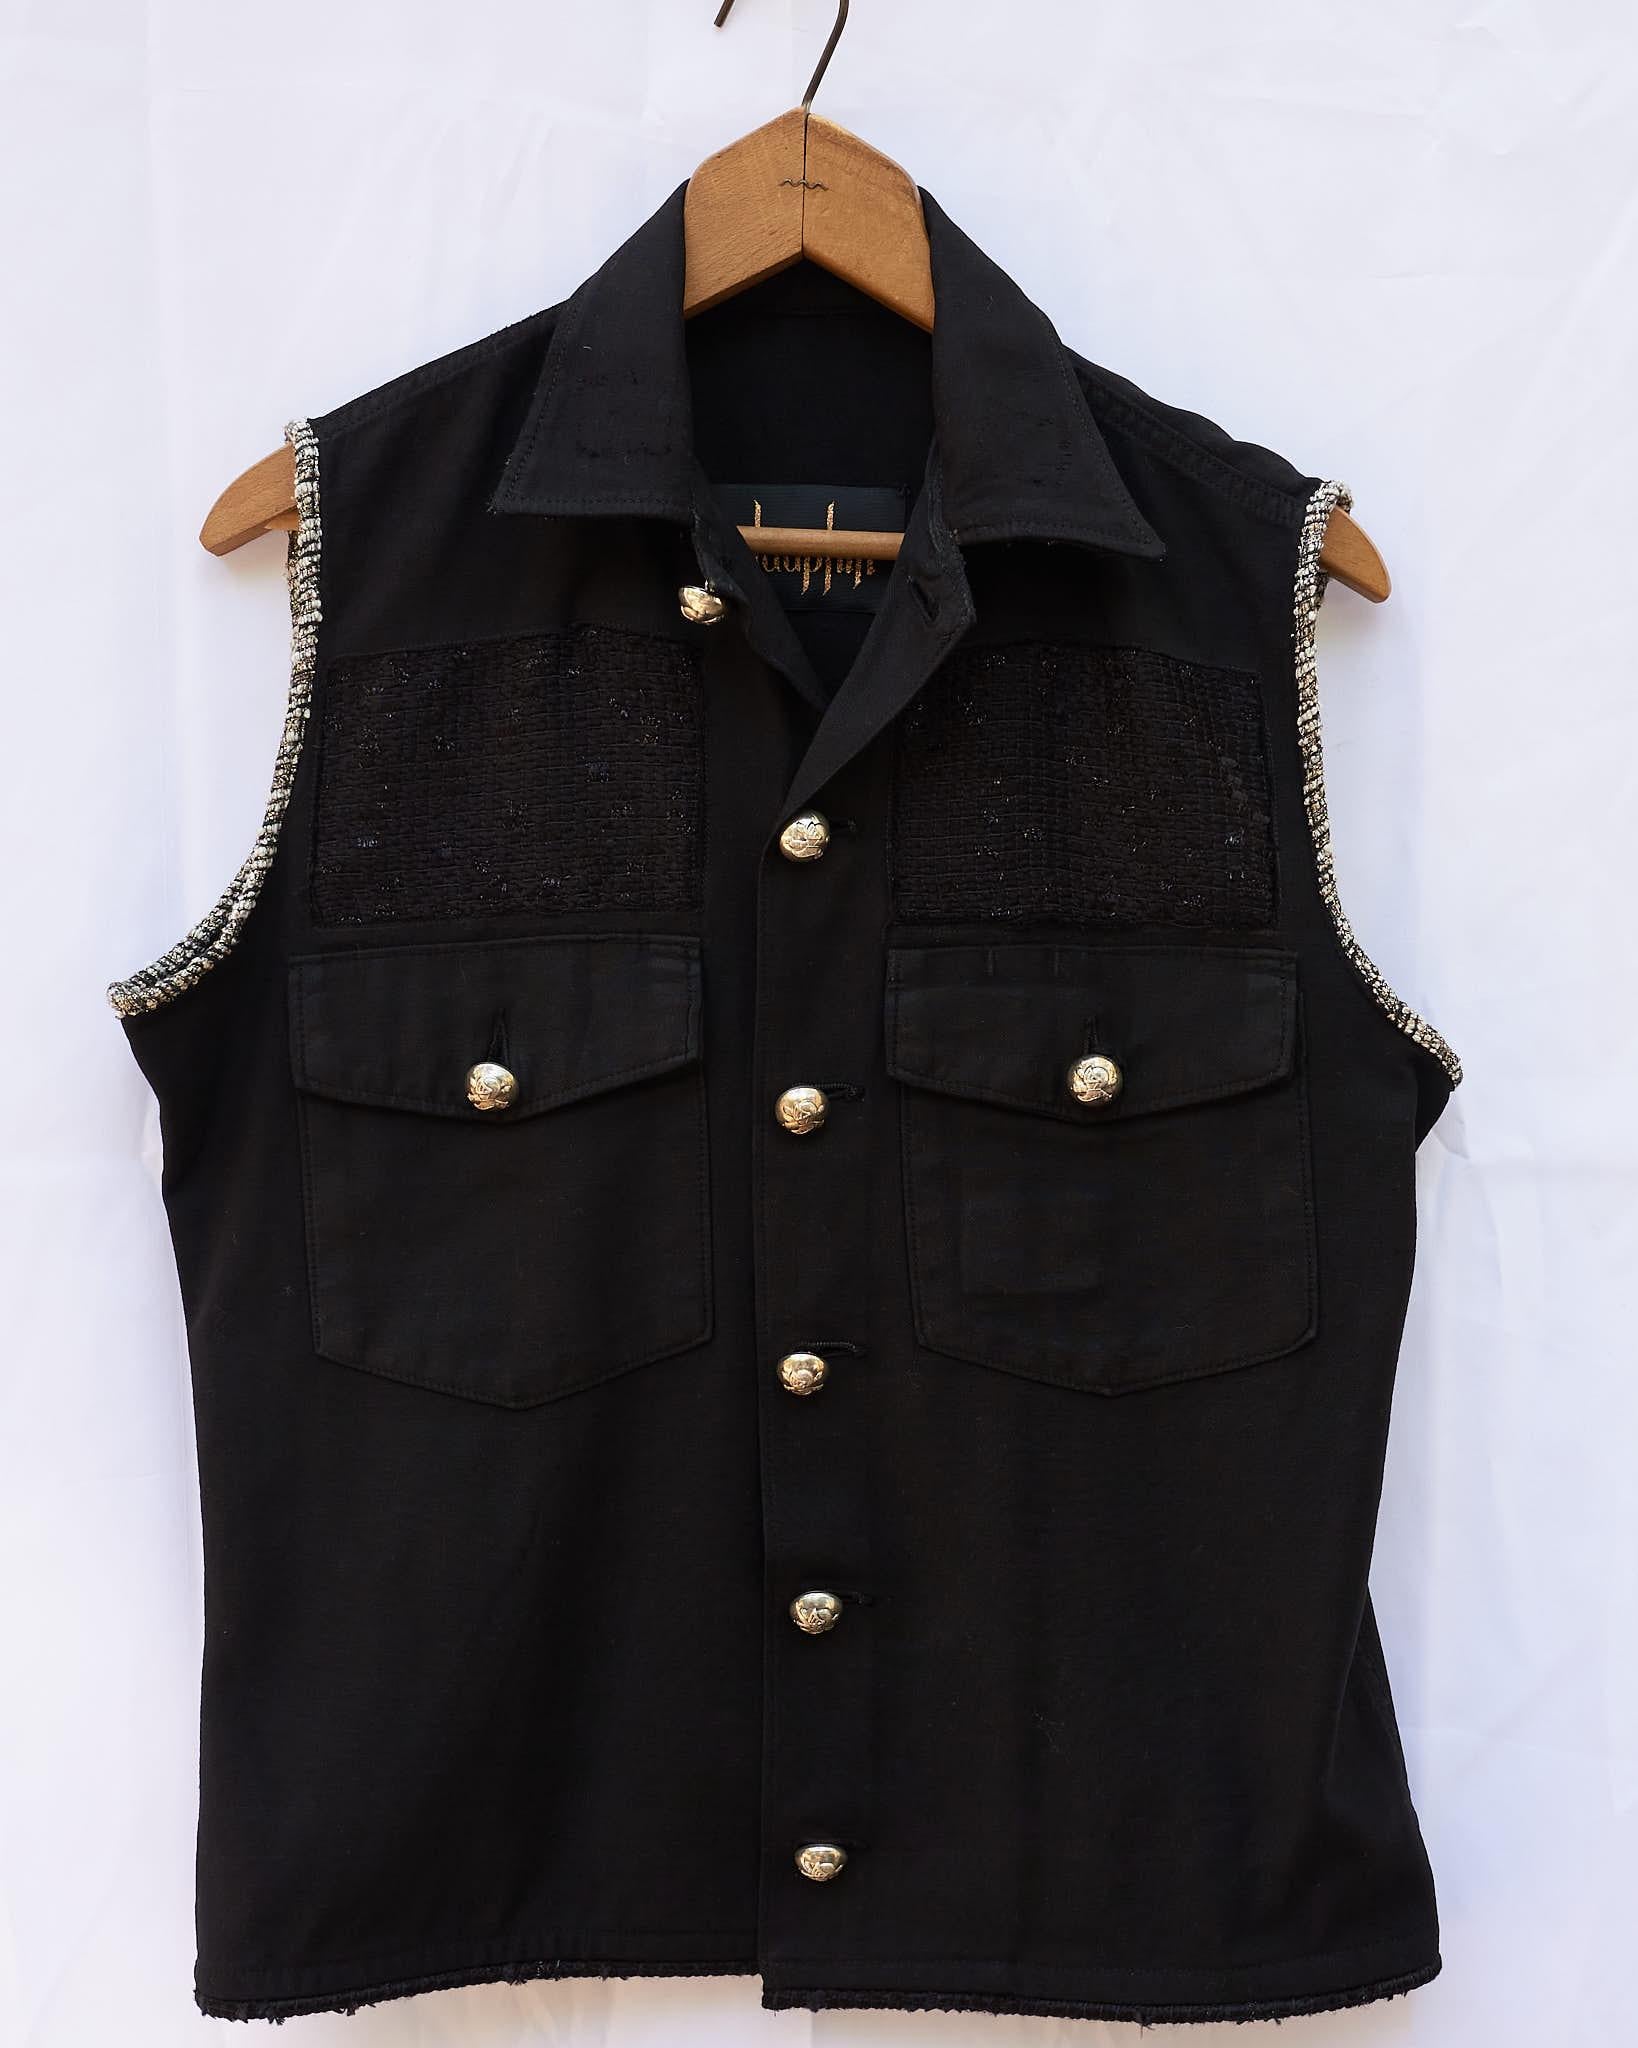 Sleeveless Jacket Vest Military Embellished Black Tweed Silver Buttons J Dauphin In New Condition In Los Angeles, CA